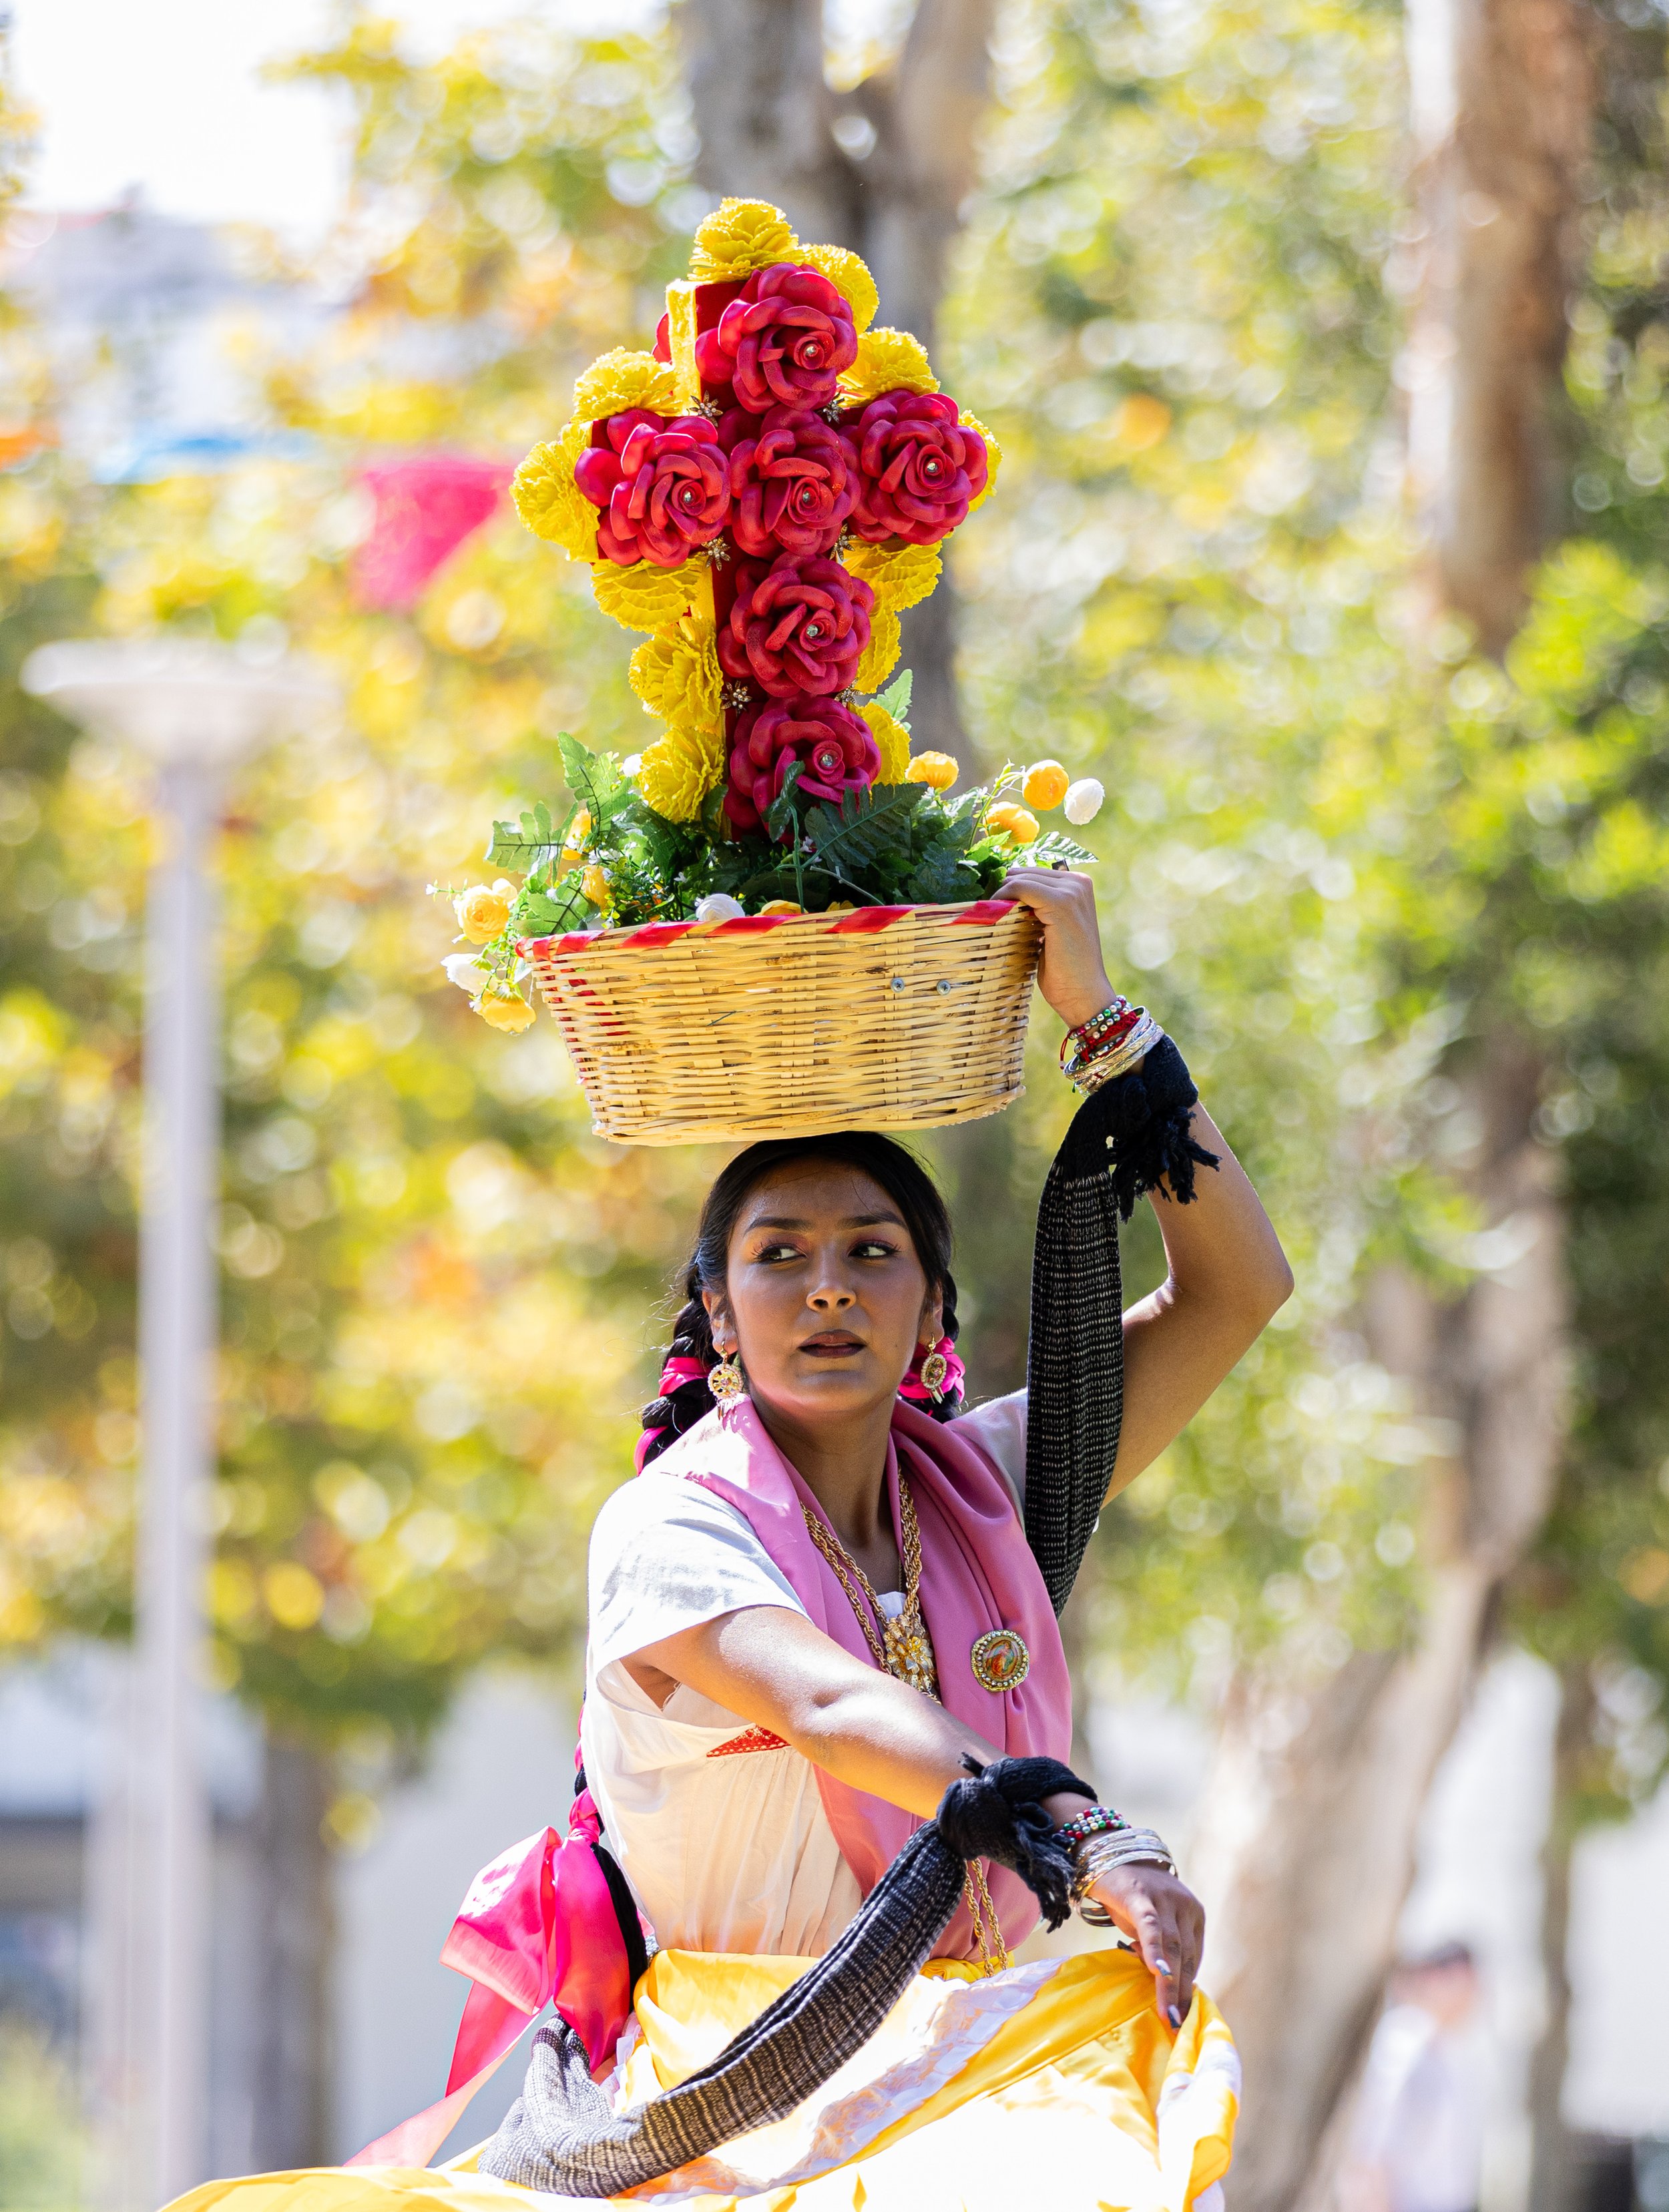  Oaxacena holding a basket filled with flowers and a cross arranged flower over their head during la Jarabe del Valle in the Guelaguetza event and first Oaxacan event held in Santa Monica College's quad on Thu. Spet. 28 at Santa Monica, Calif. (Danil